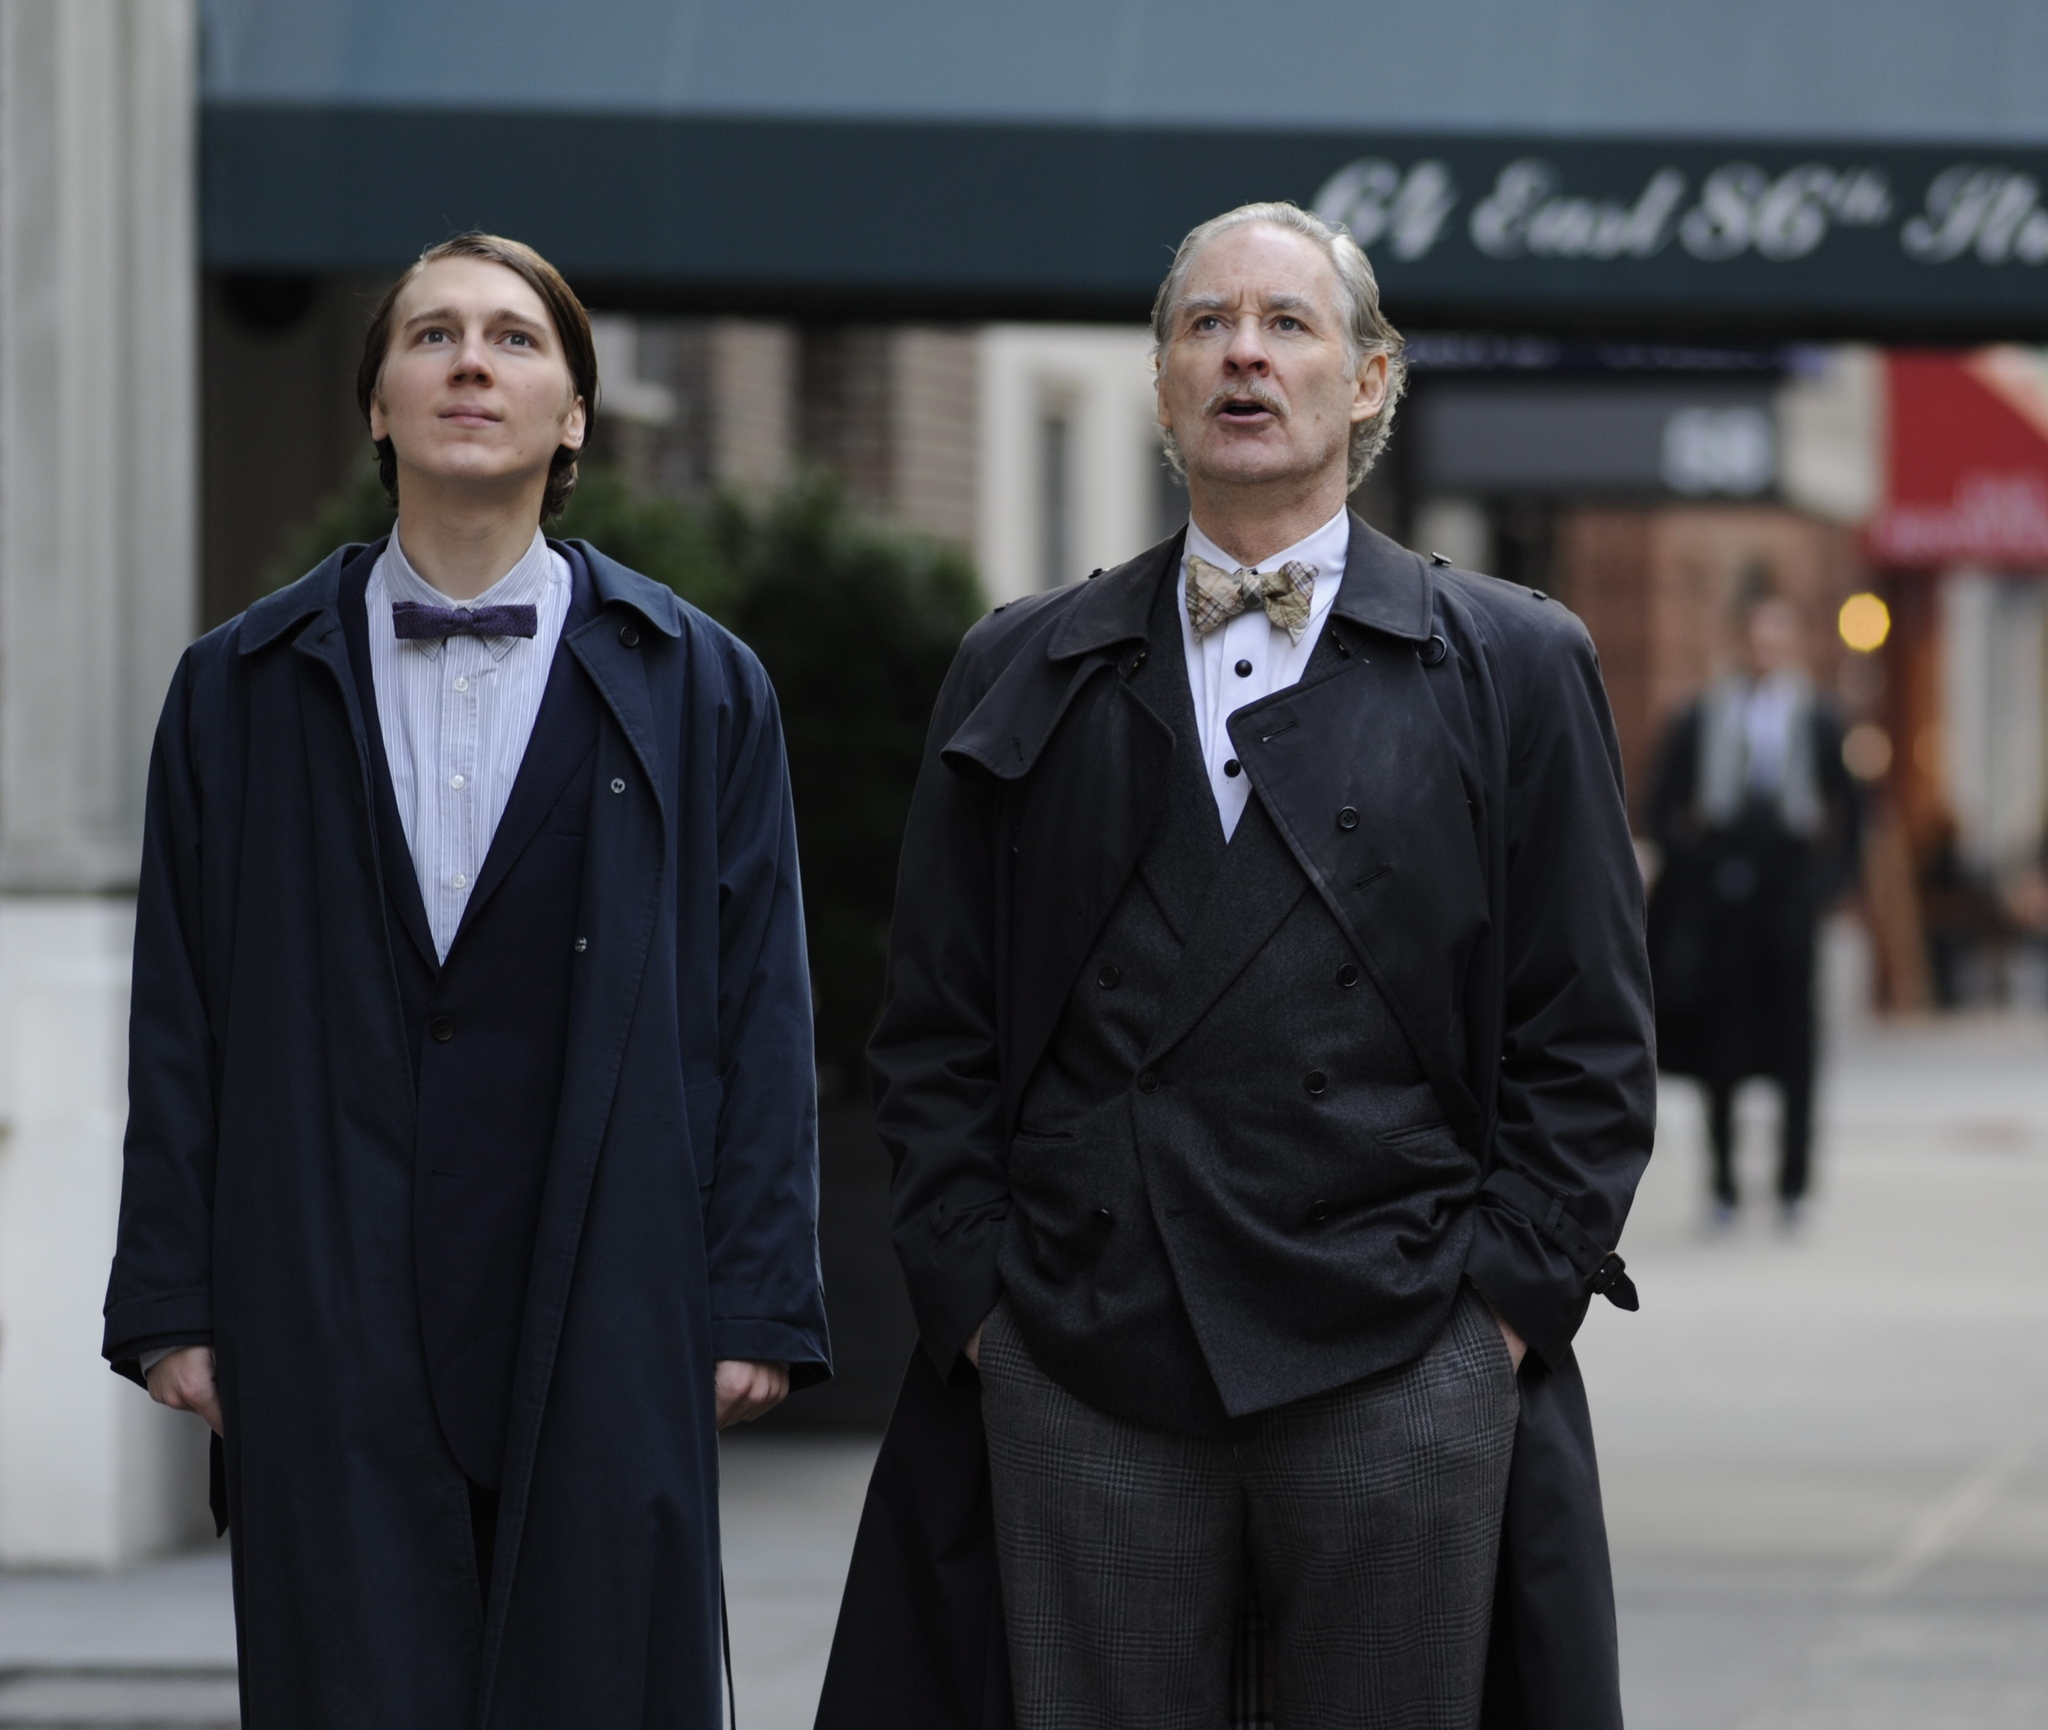 Still of Kevin Kline and Paul Dano in The Extra Man (2010)